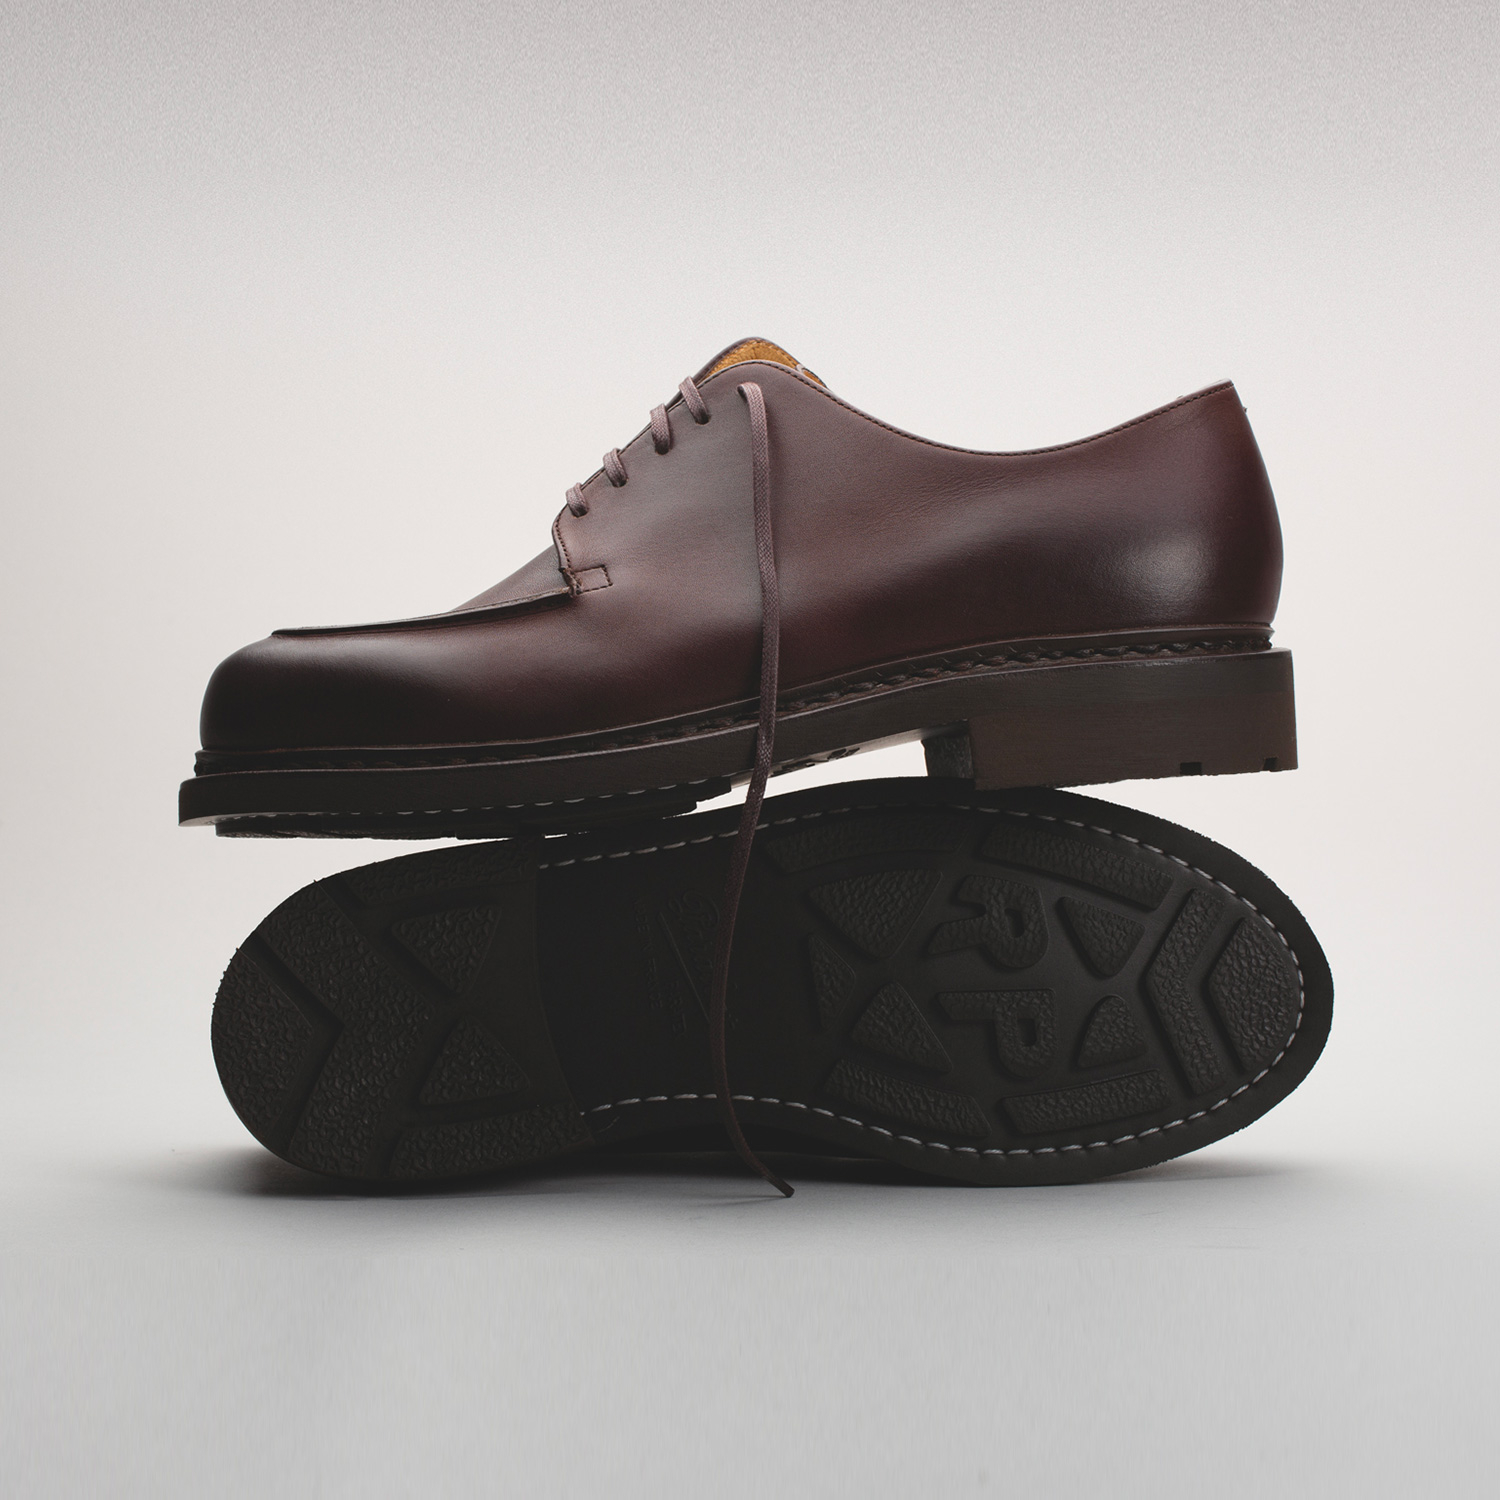 MIRAGE shoes in Brown color by Arpenteur